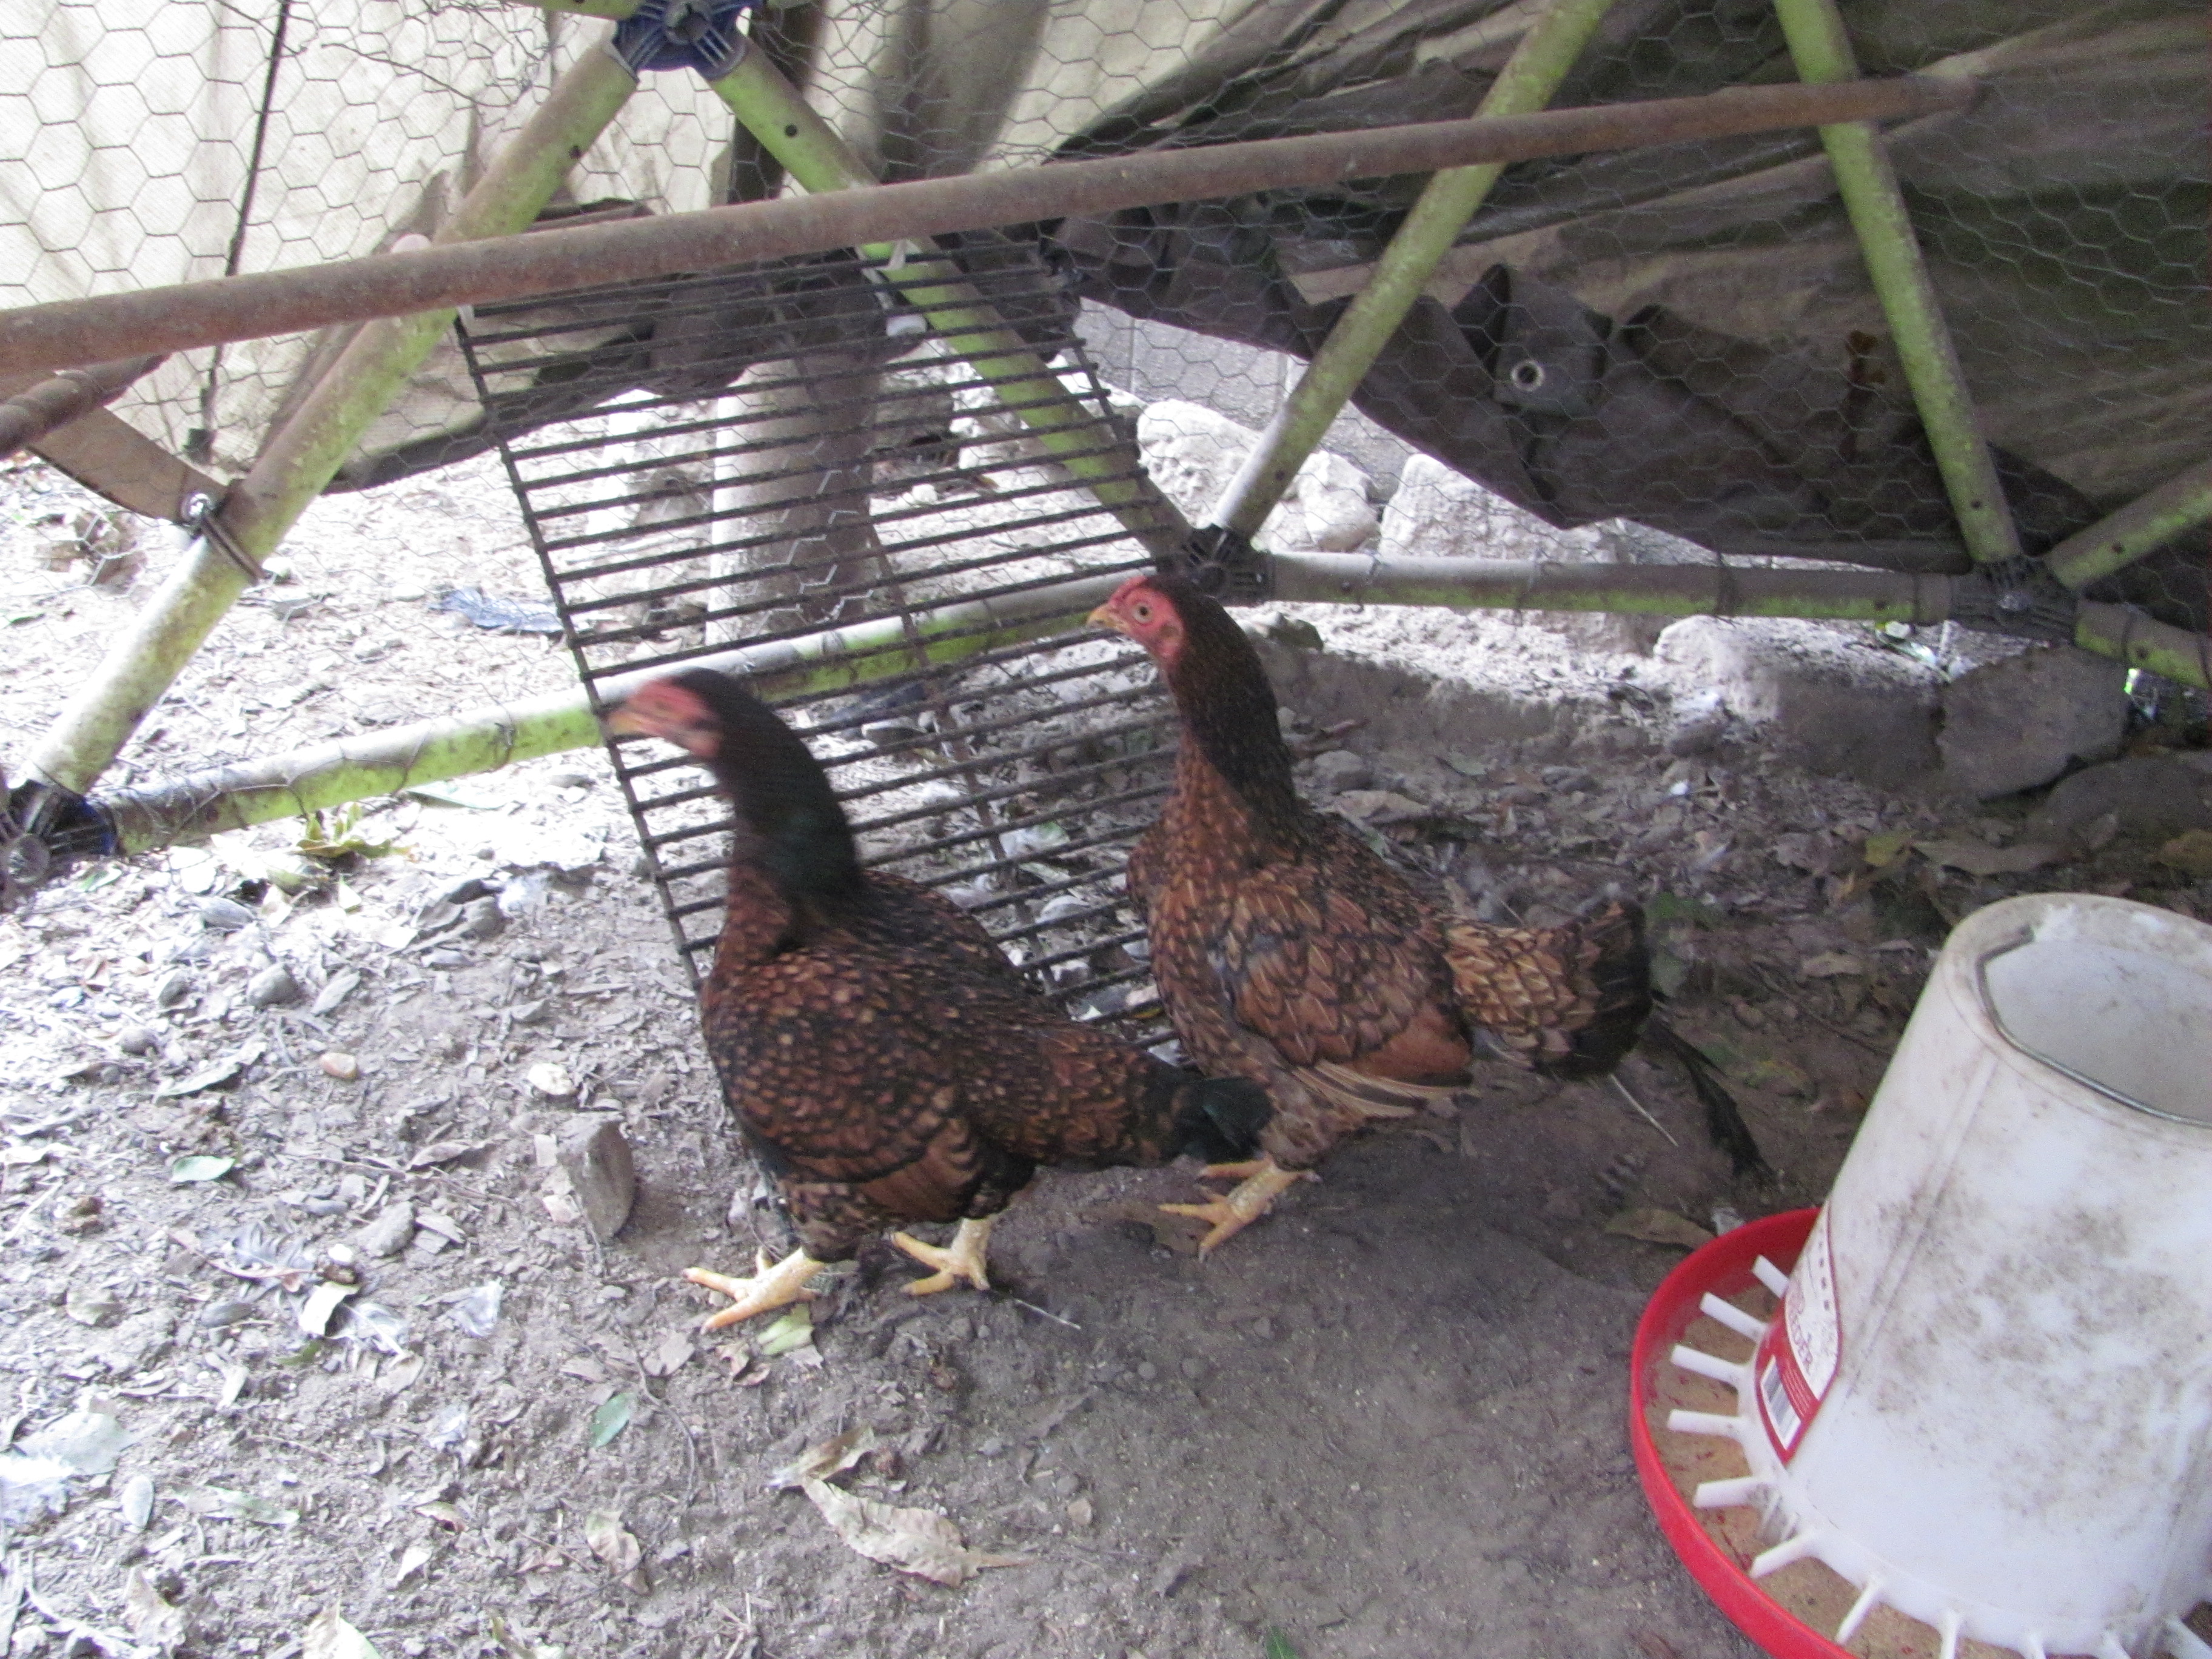 This is Tina & Tammy.  They are new (Very Old) Cornish hens I acquired. 
Thought about naming them Nenan & Tatunt  :o)